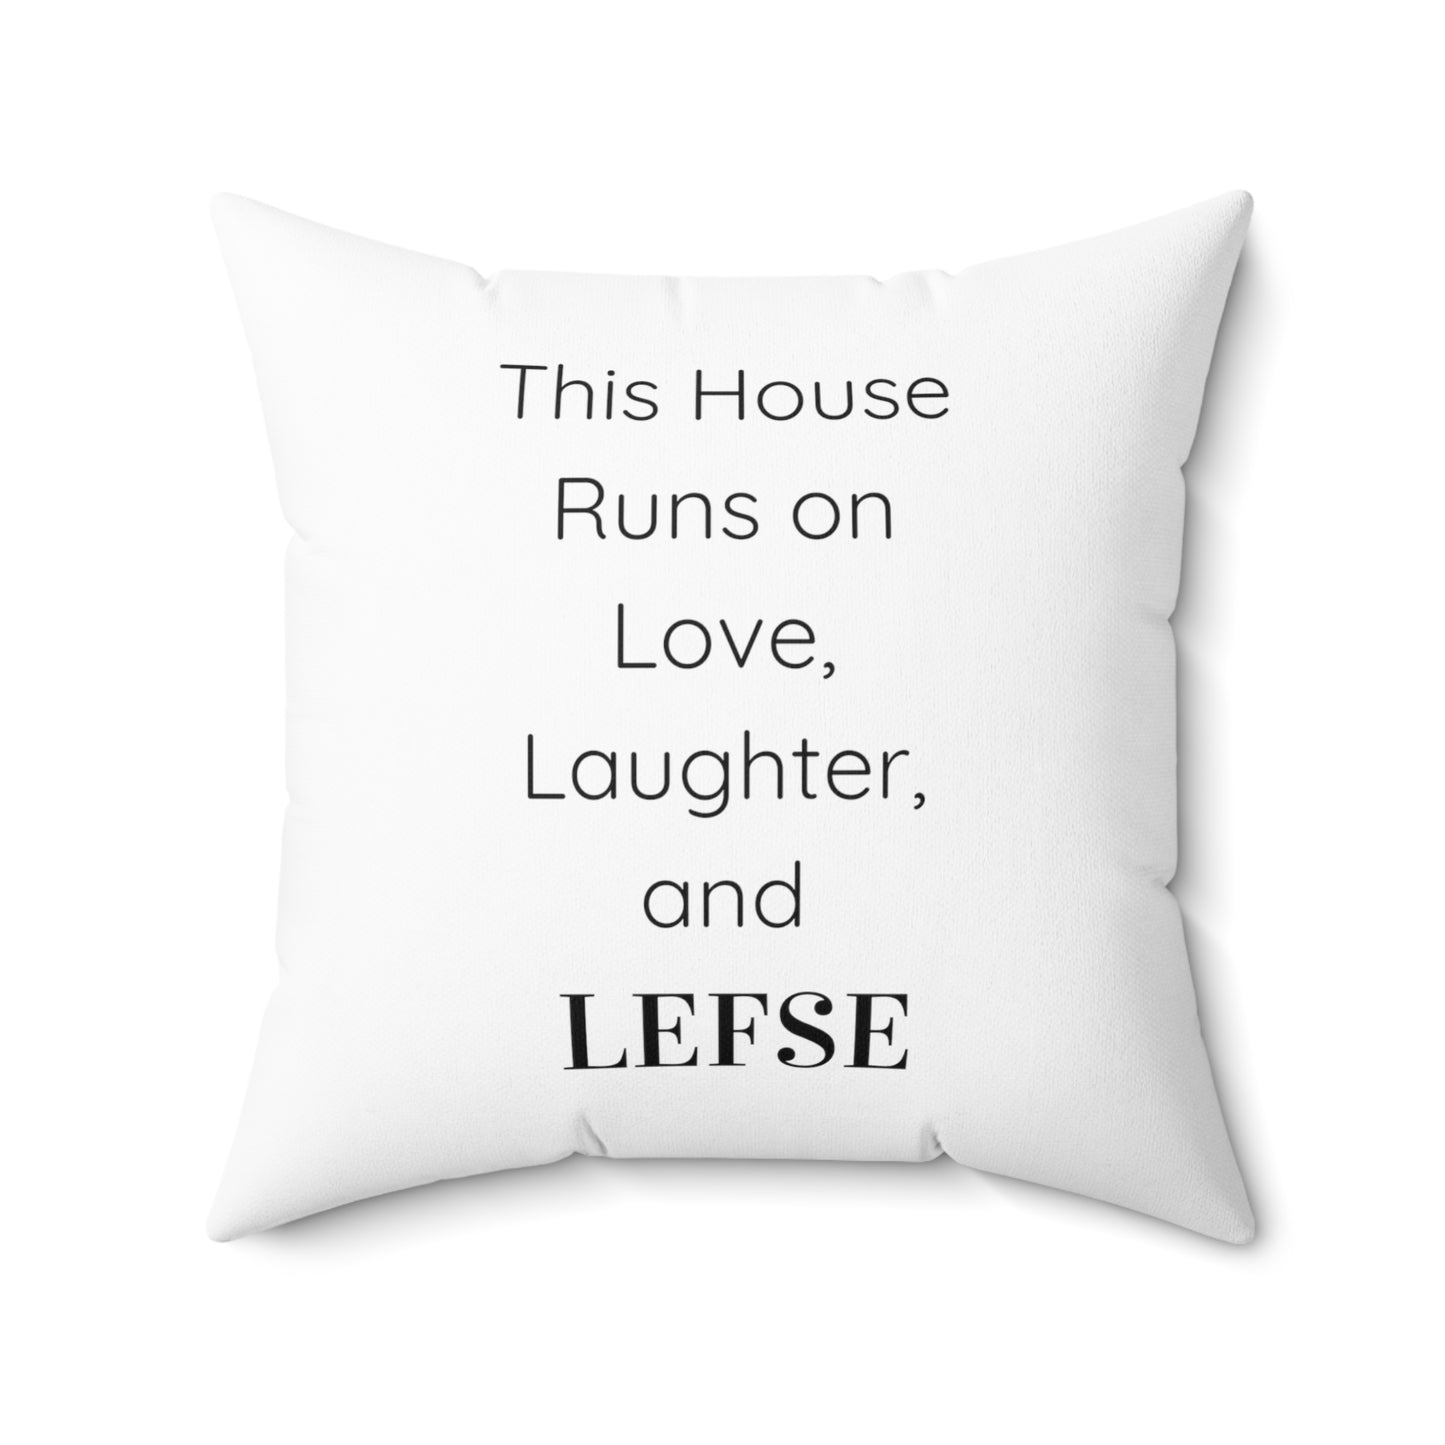 This House Runs on Laughter and Lefse Pillow Koselig Throw Pillow Norwegian Home Decor Housewarming Gift Faux Suede Koselig Pillow Norway